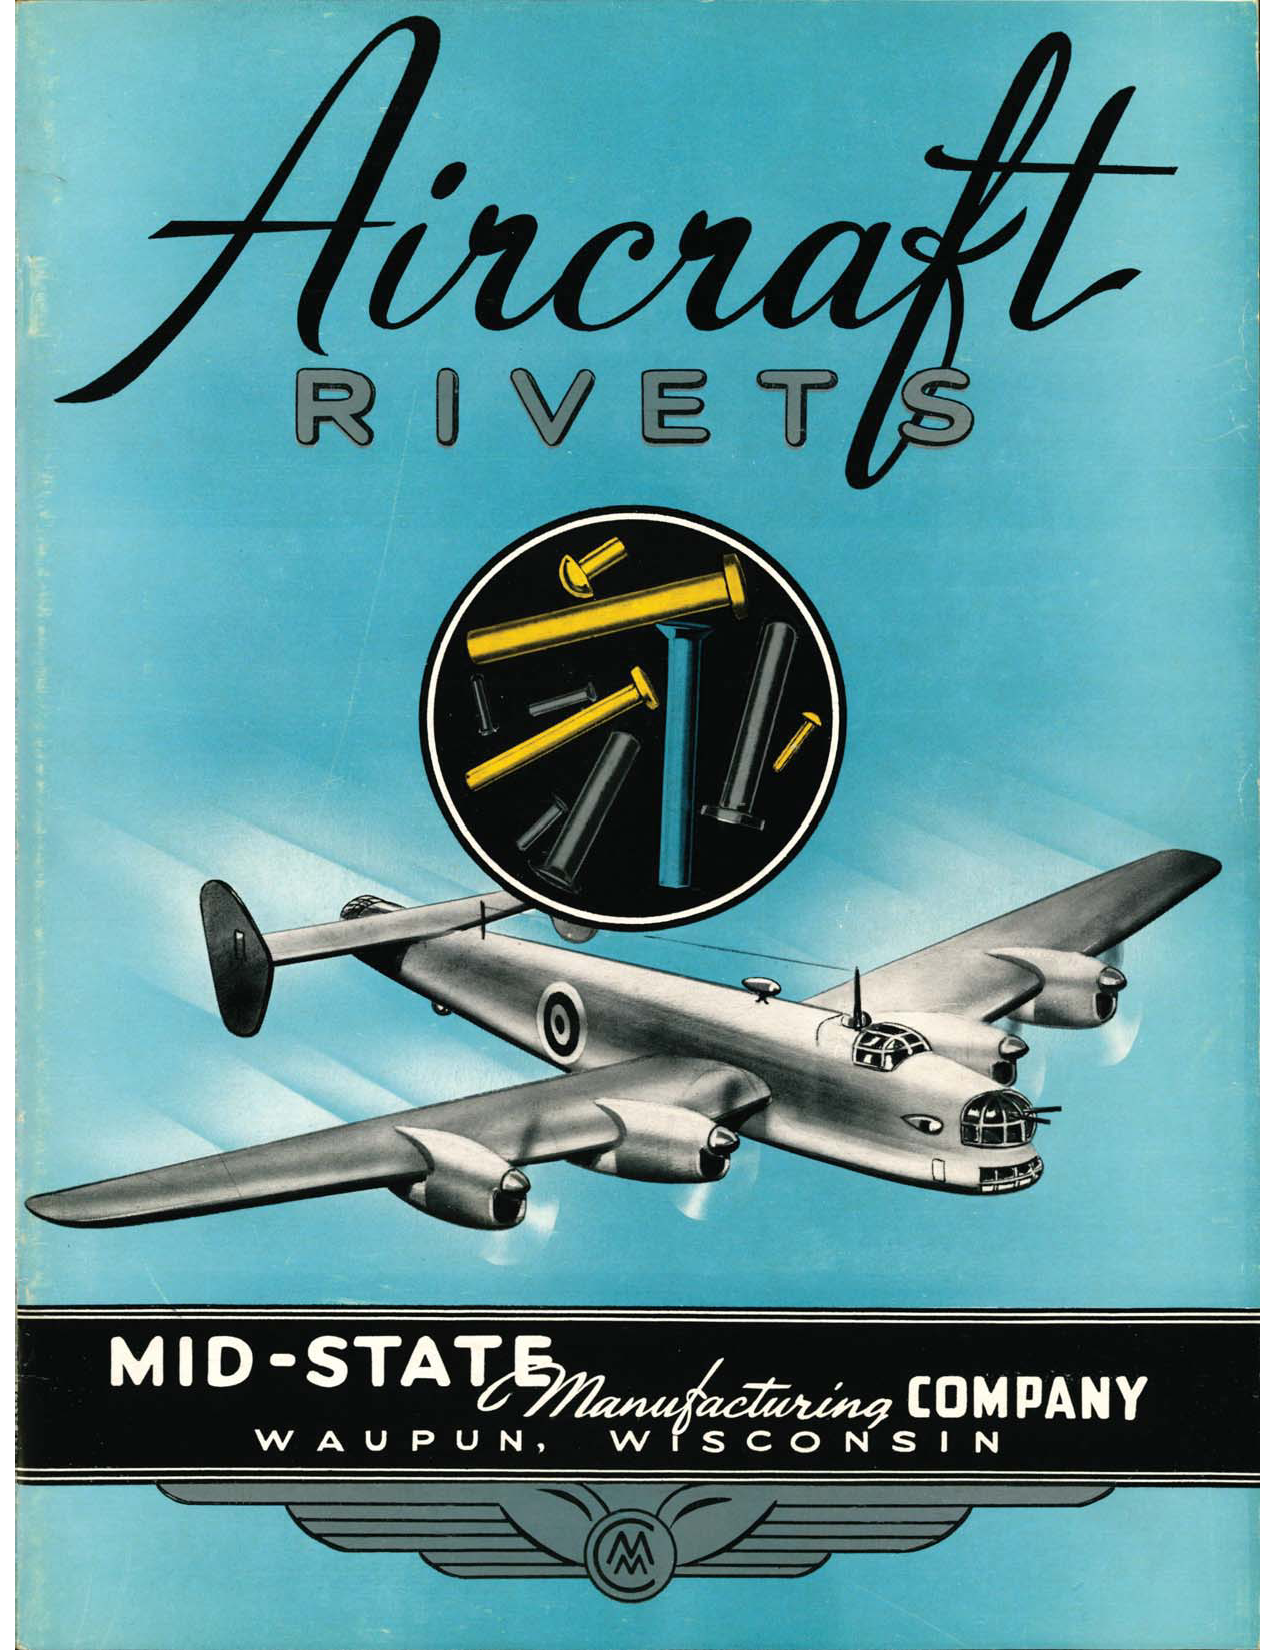 Sample page 1 from AirCorps Library document: Aircraft Rivets - Mid-State Manufacturing Co